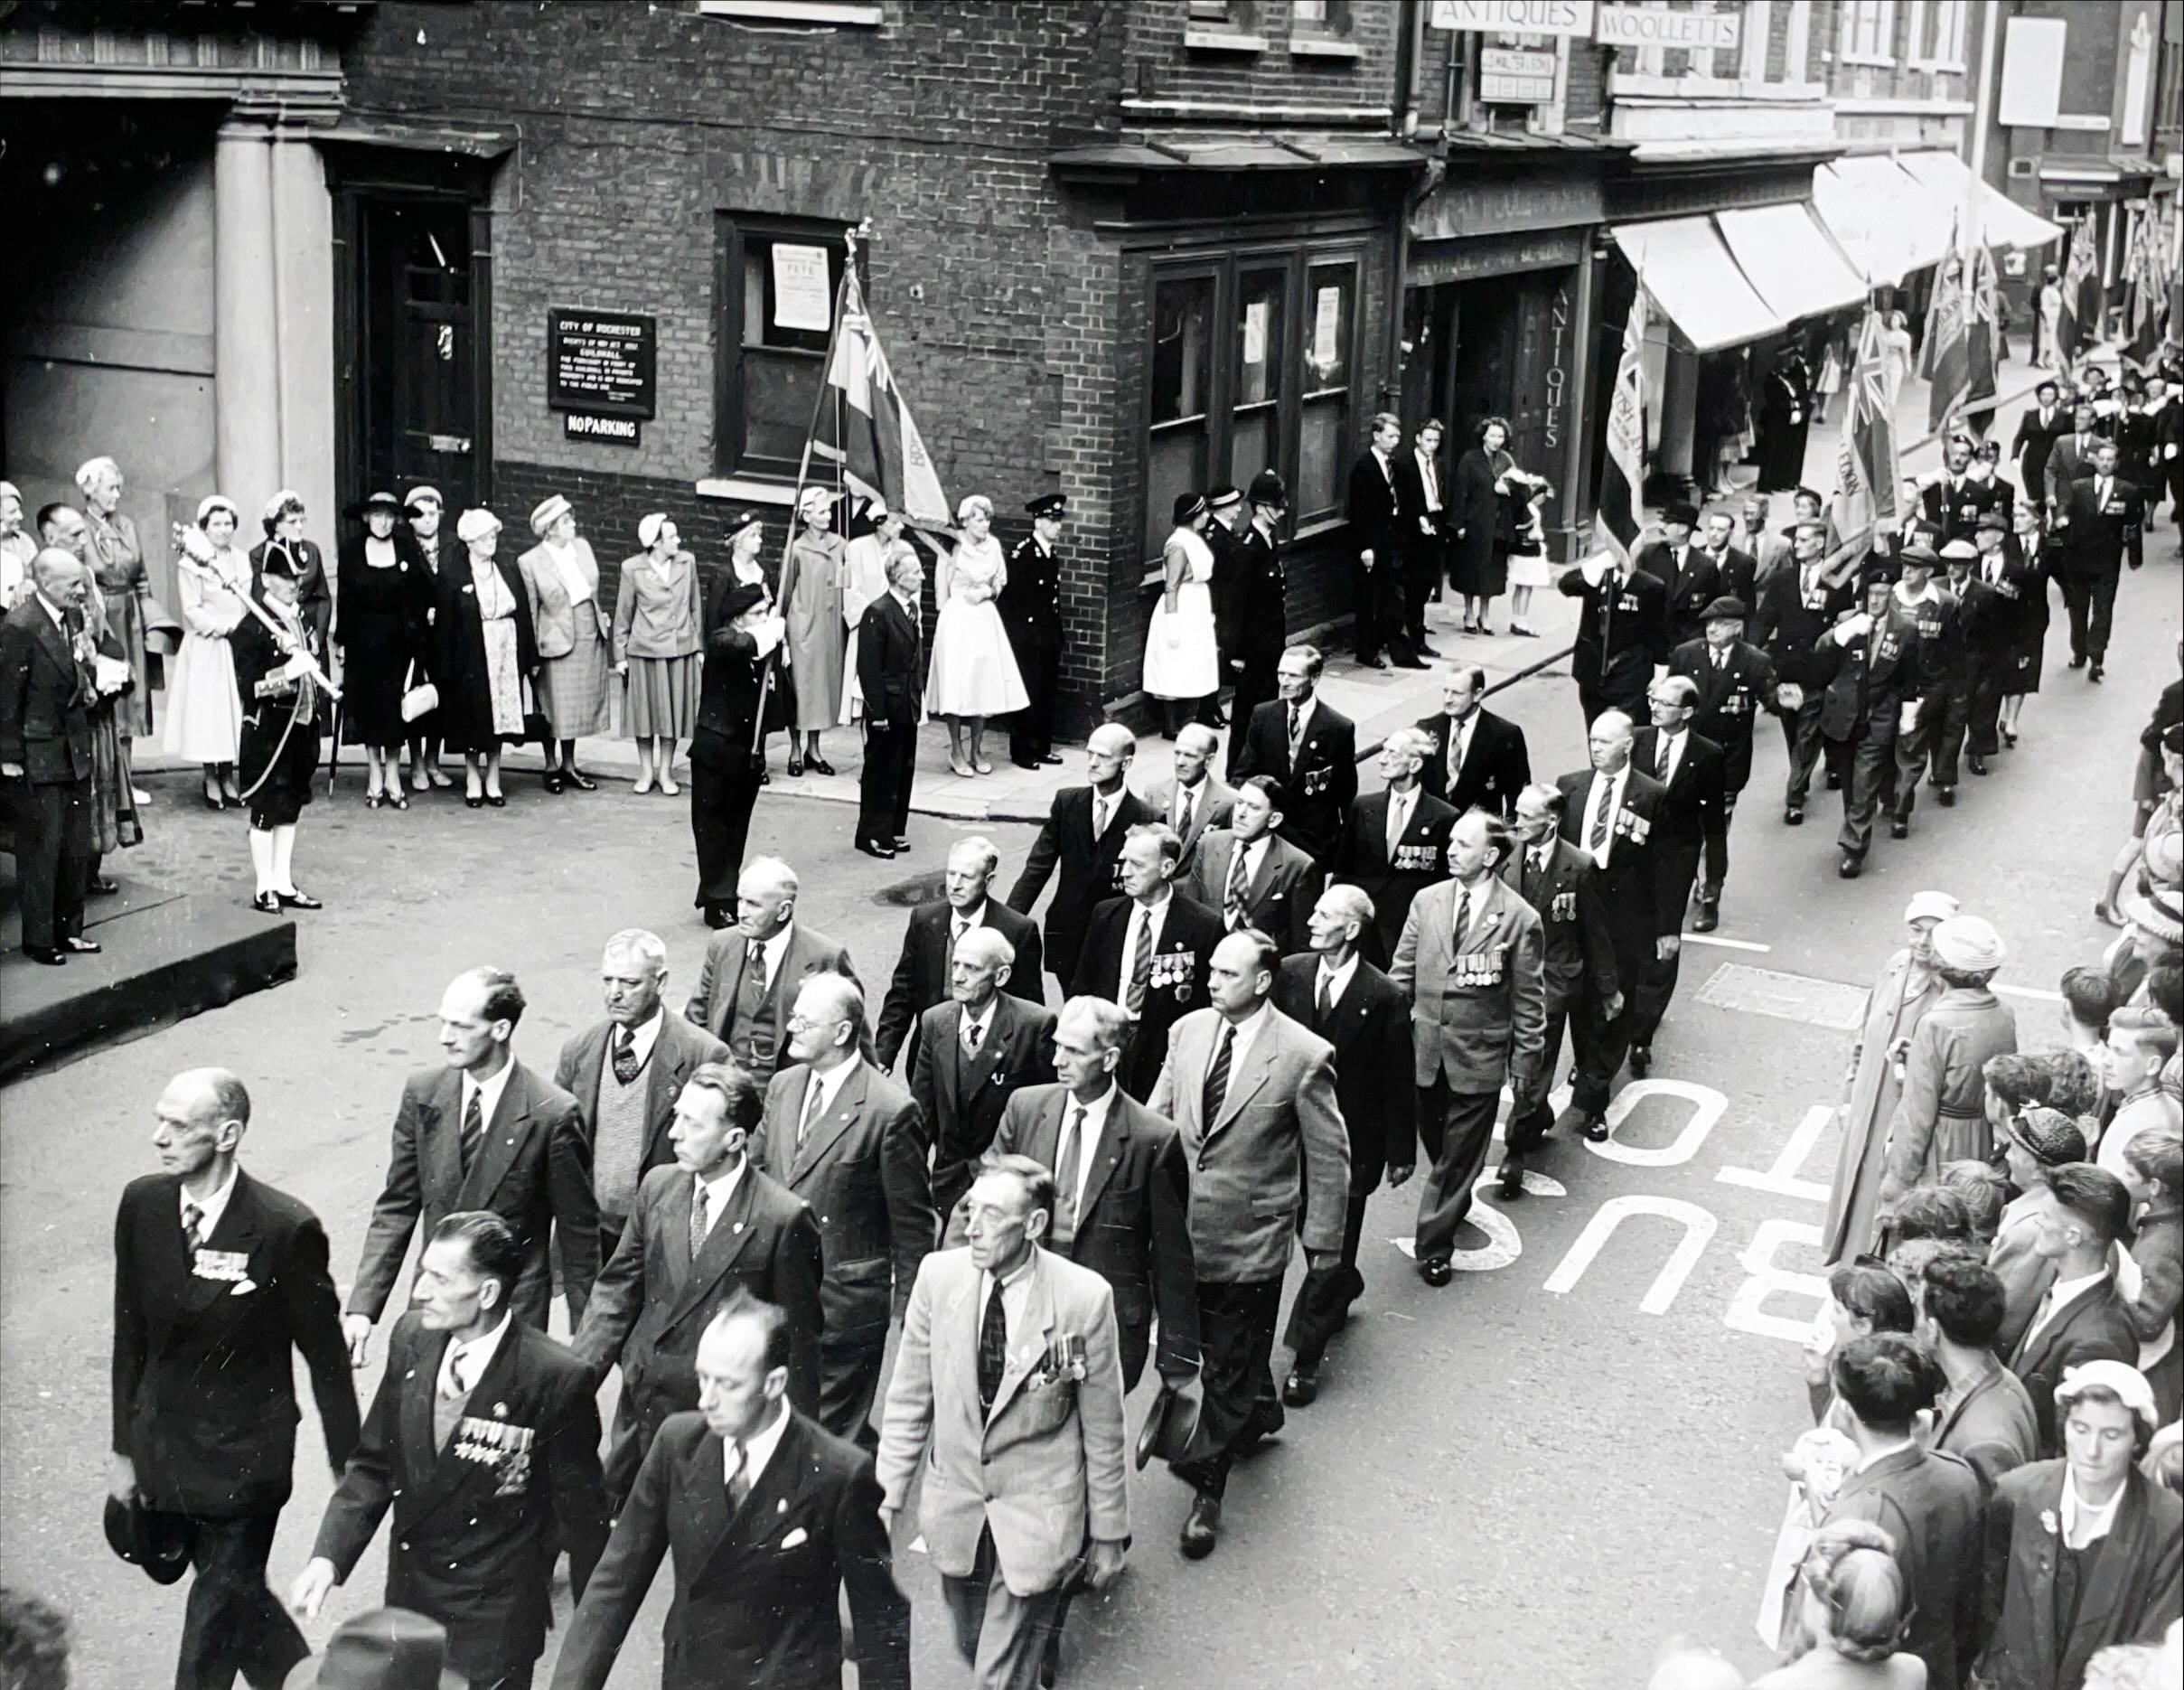 March past of the Kent branches of the British Legion, July 1959